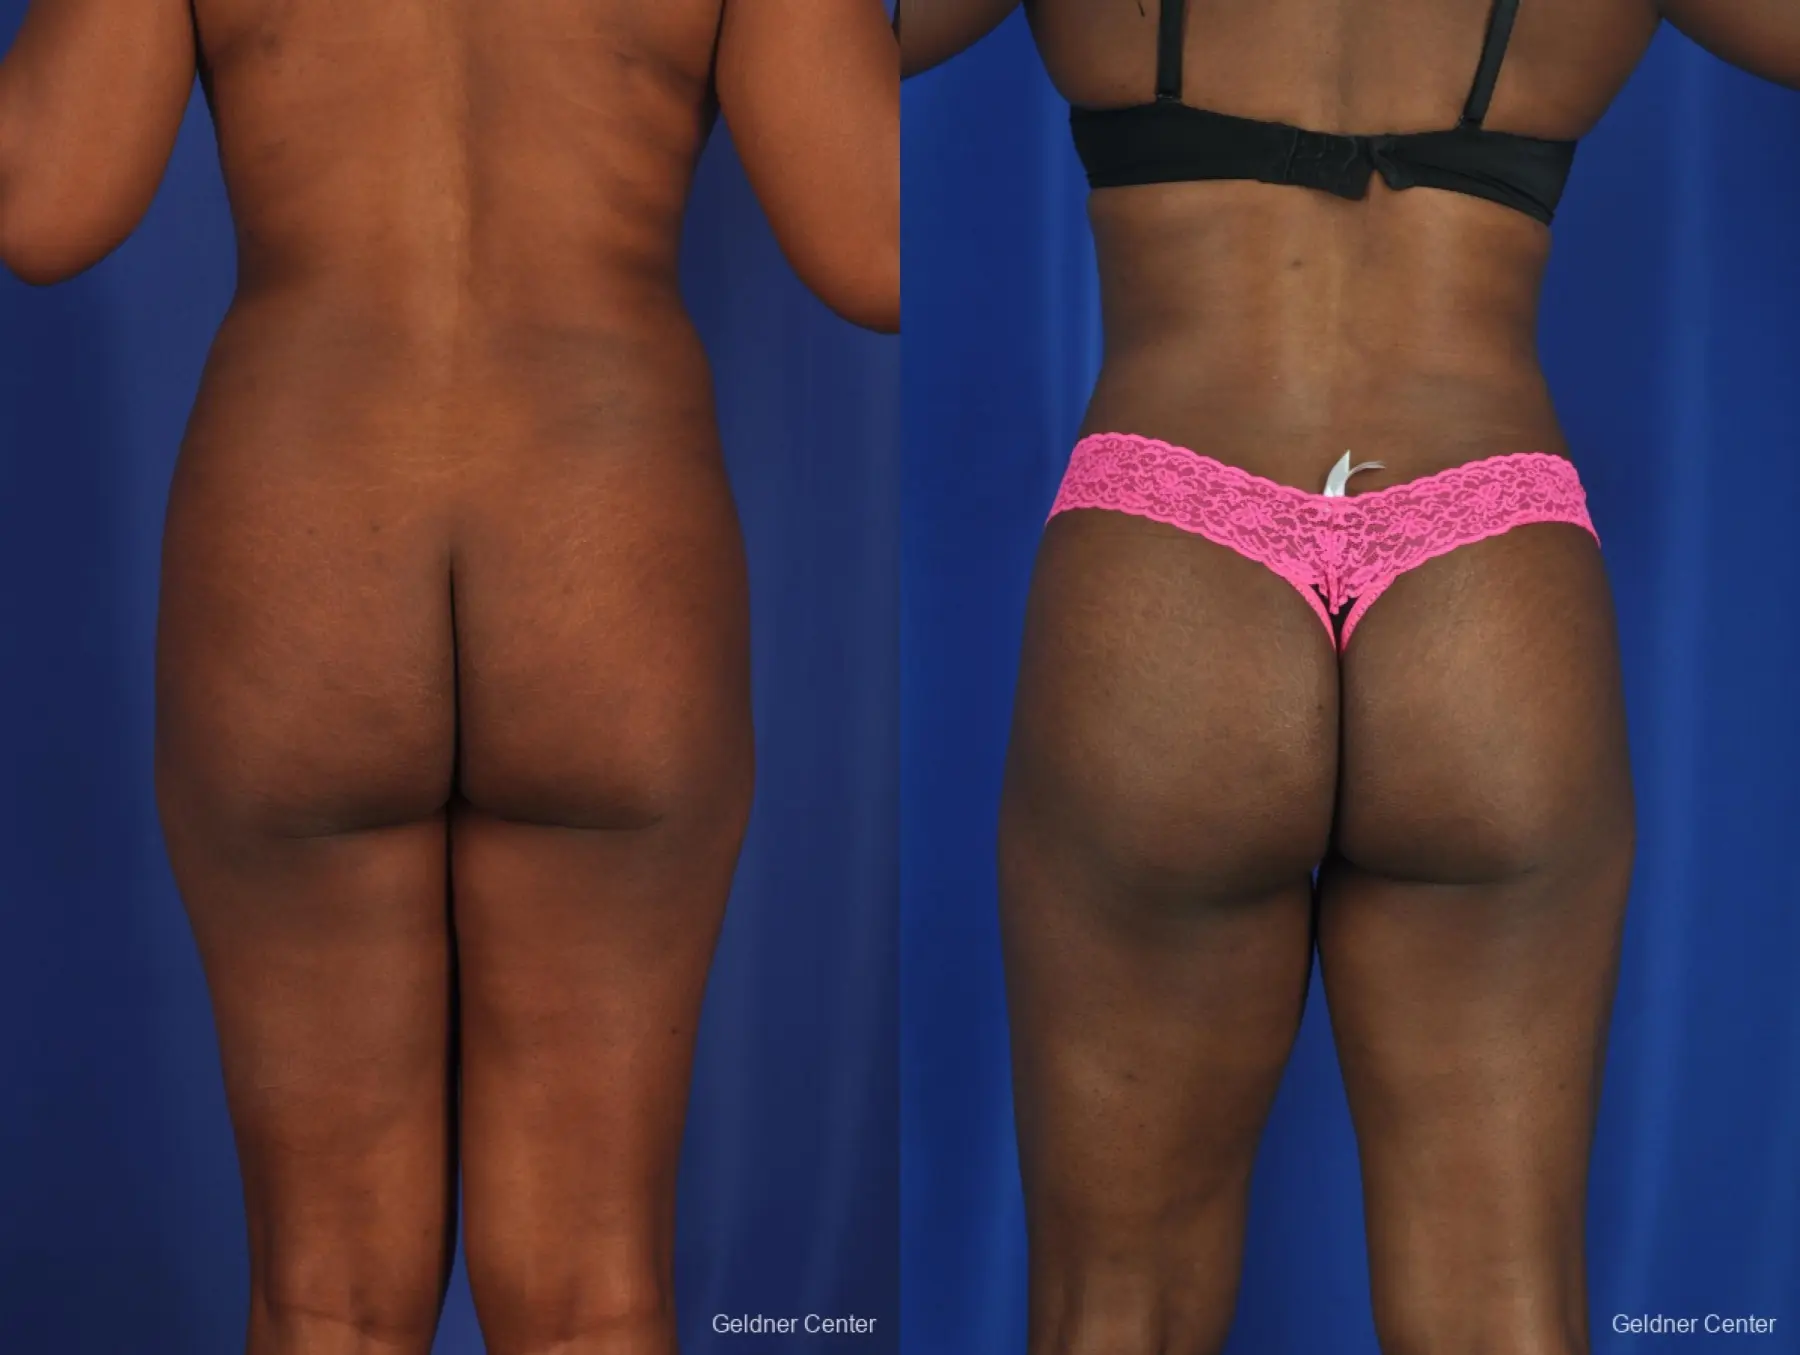 Liposuction: Patient 3 - Before and After 4